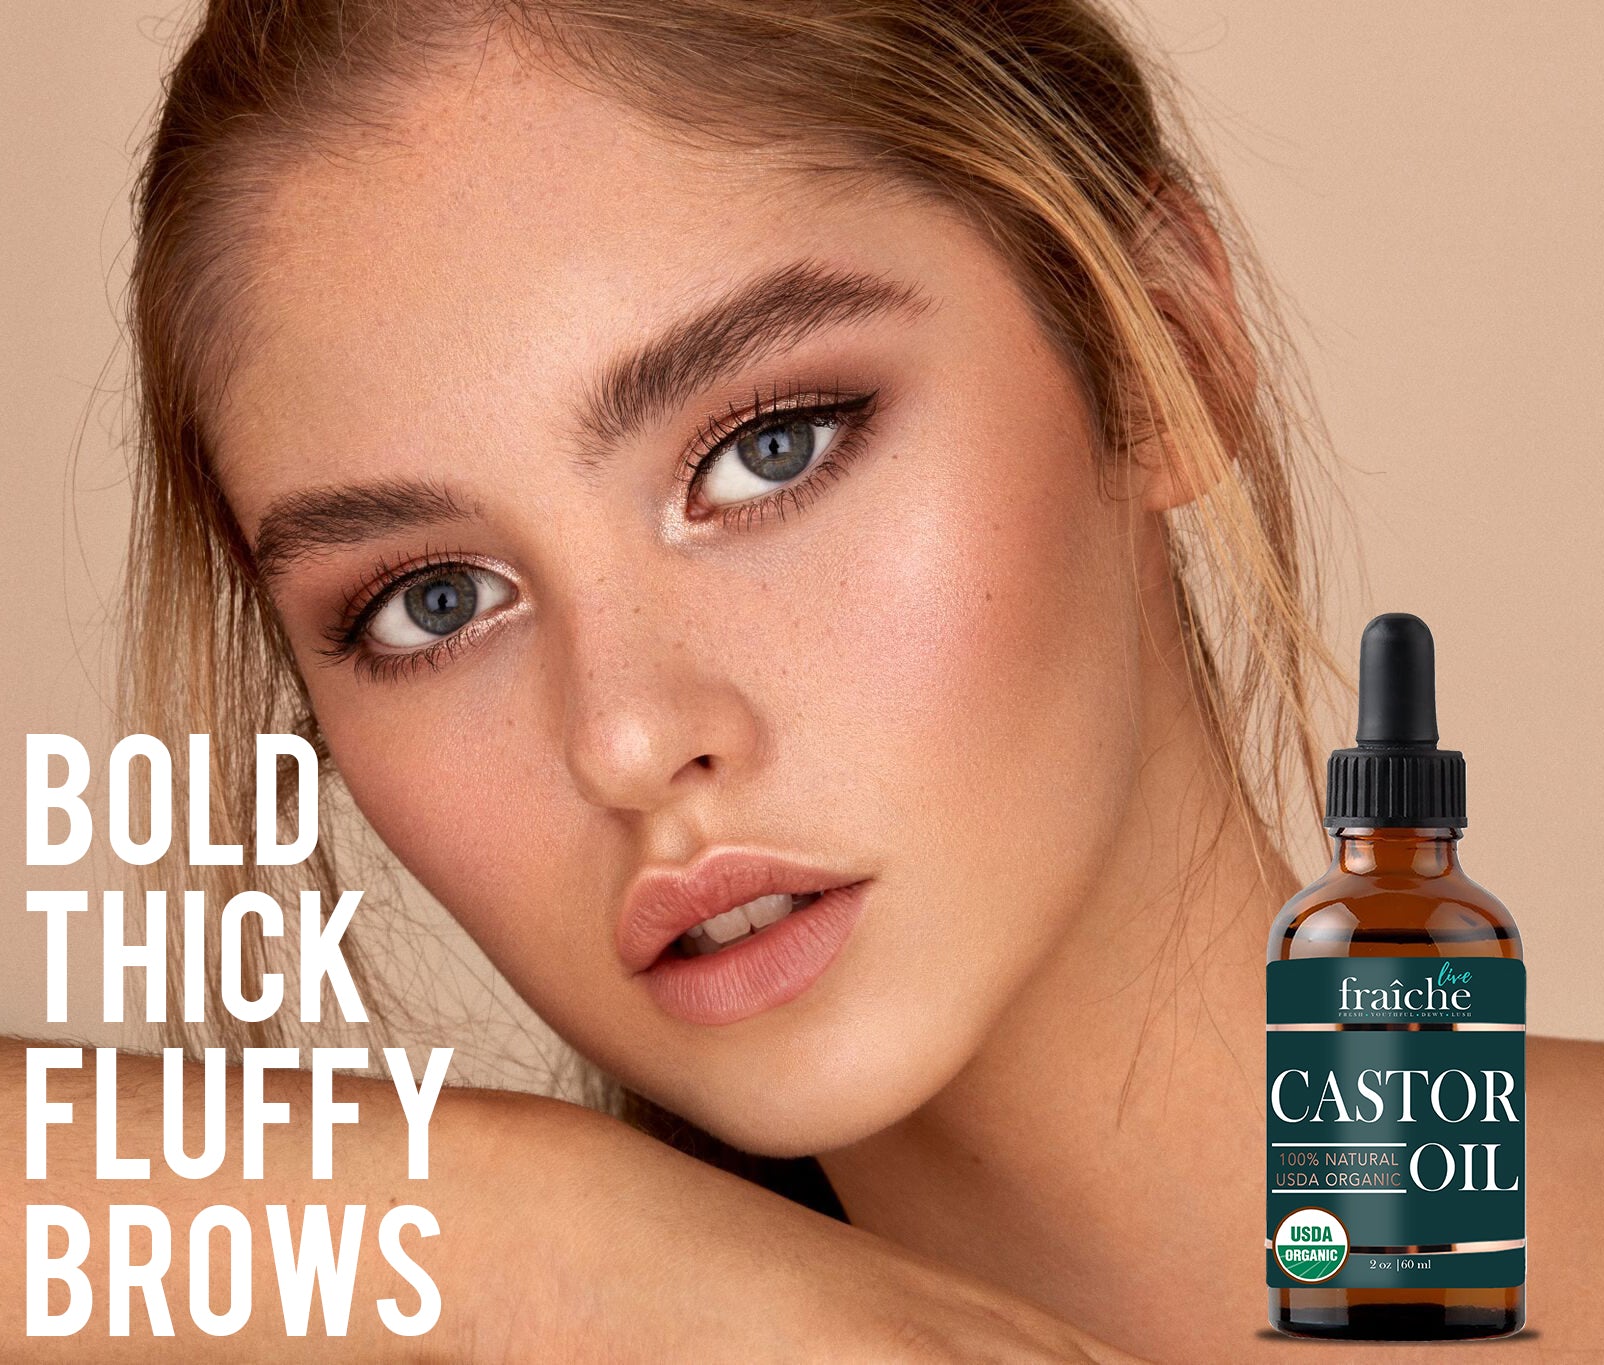 OAUSTAR Castor Oil-100% Natural - Cold-Pressed for Eyebrows, Eyelashes,  Skin, Nail and Hair (30ml) | M.catch.com.au